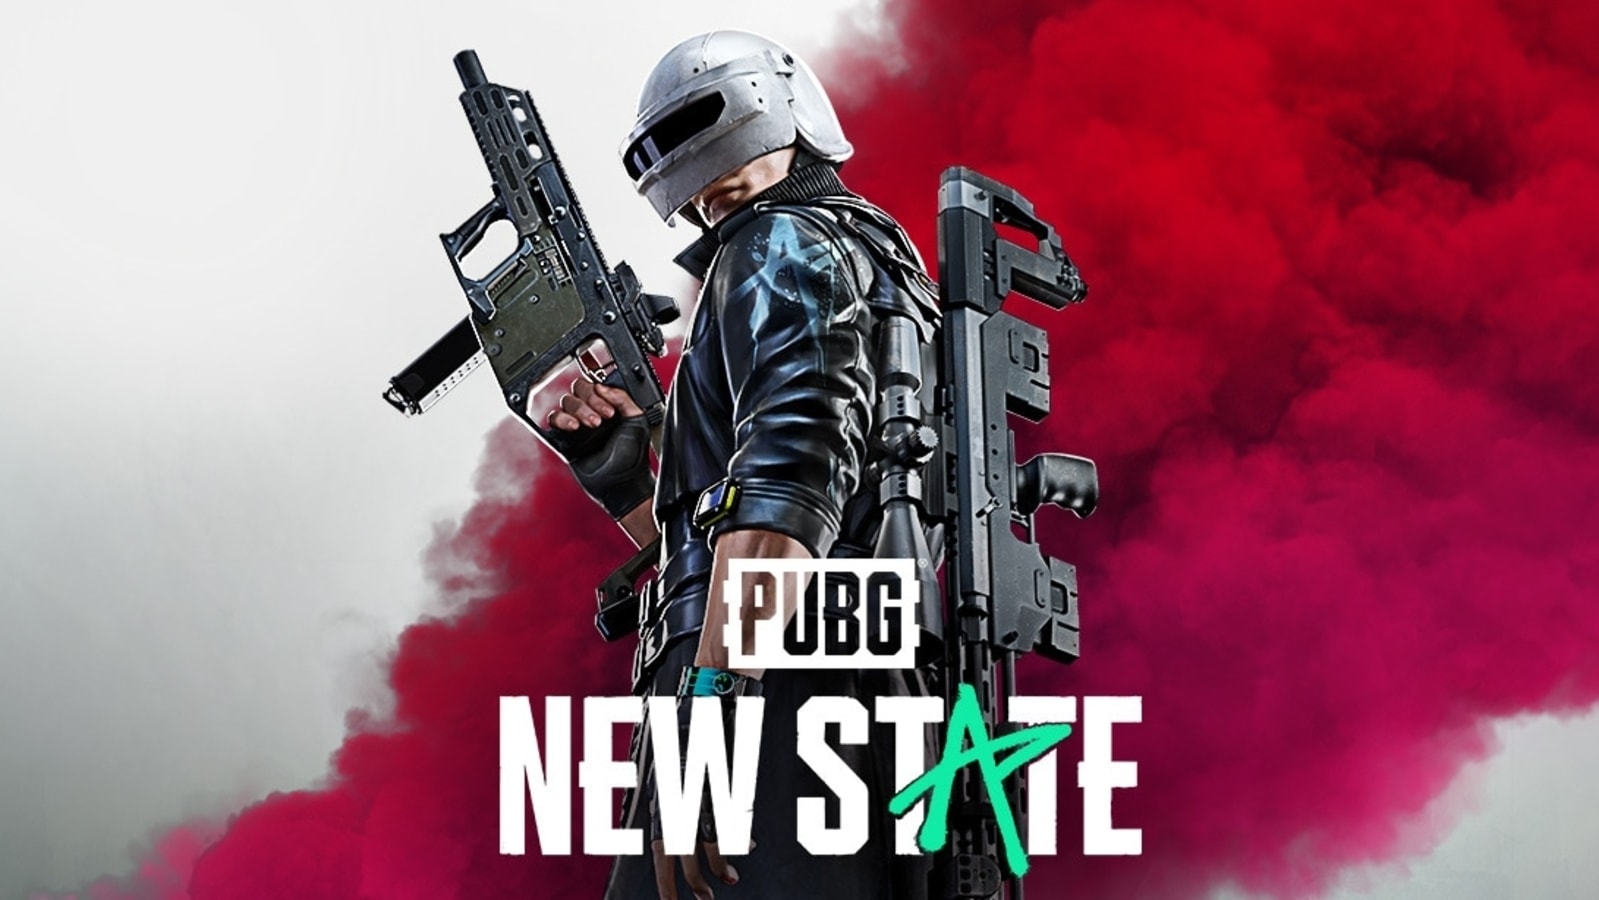 pubg pc system requirements